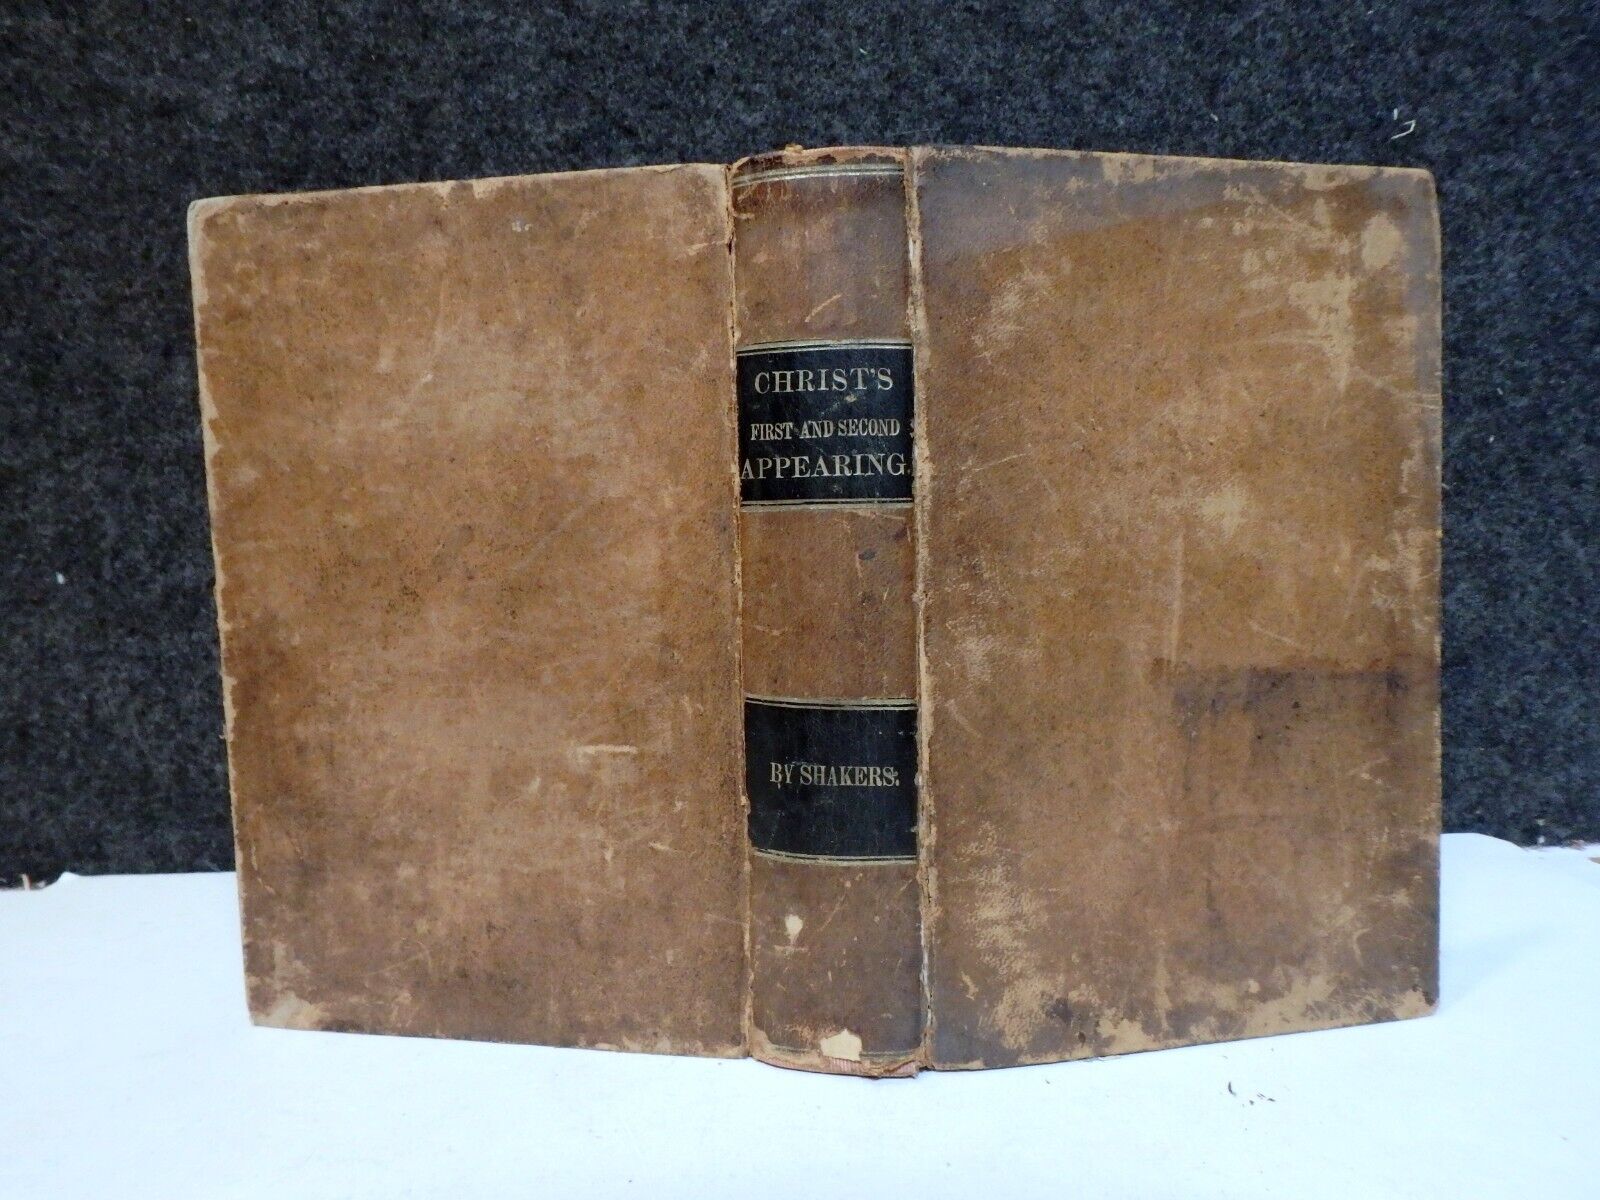 1856 SHAKERS BIBLE Testimony of Christ\'s Second Appearing FOURTH EDITION BOOK